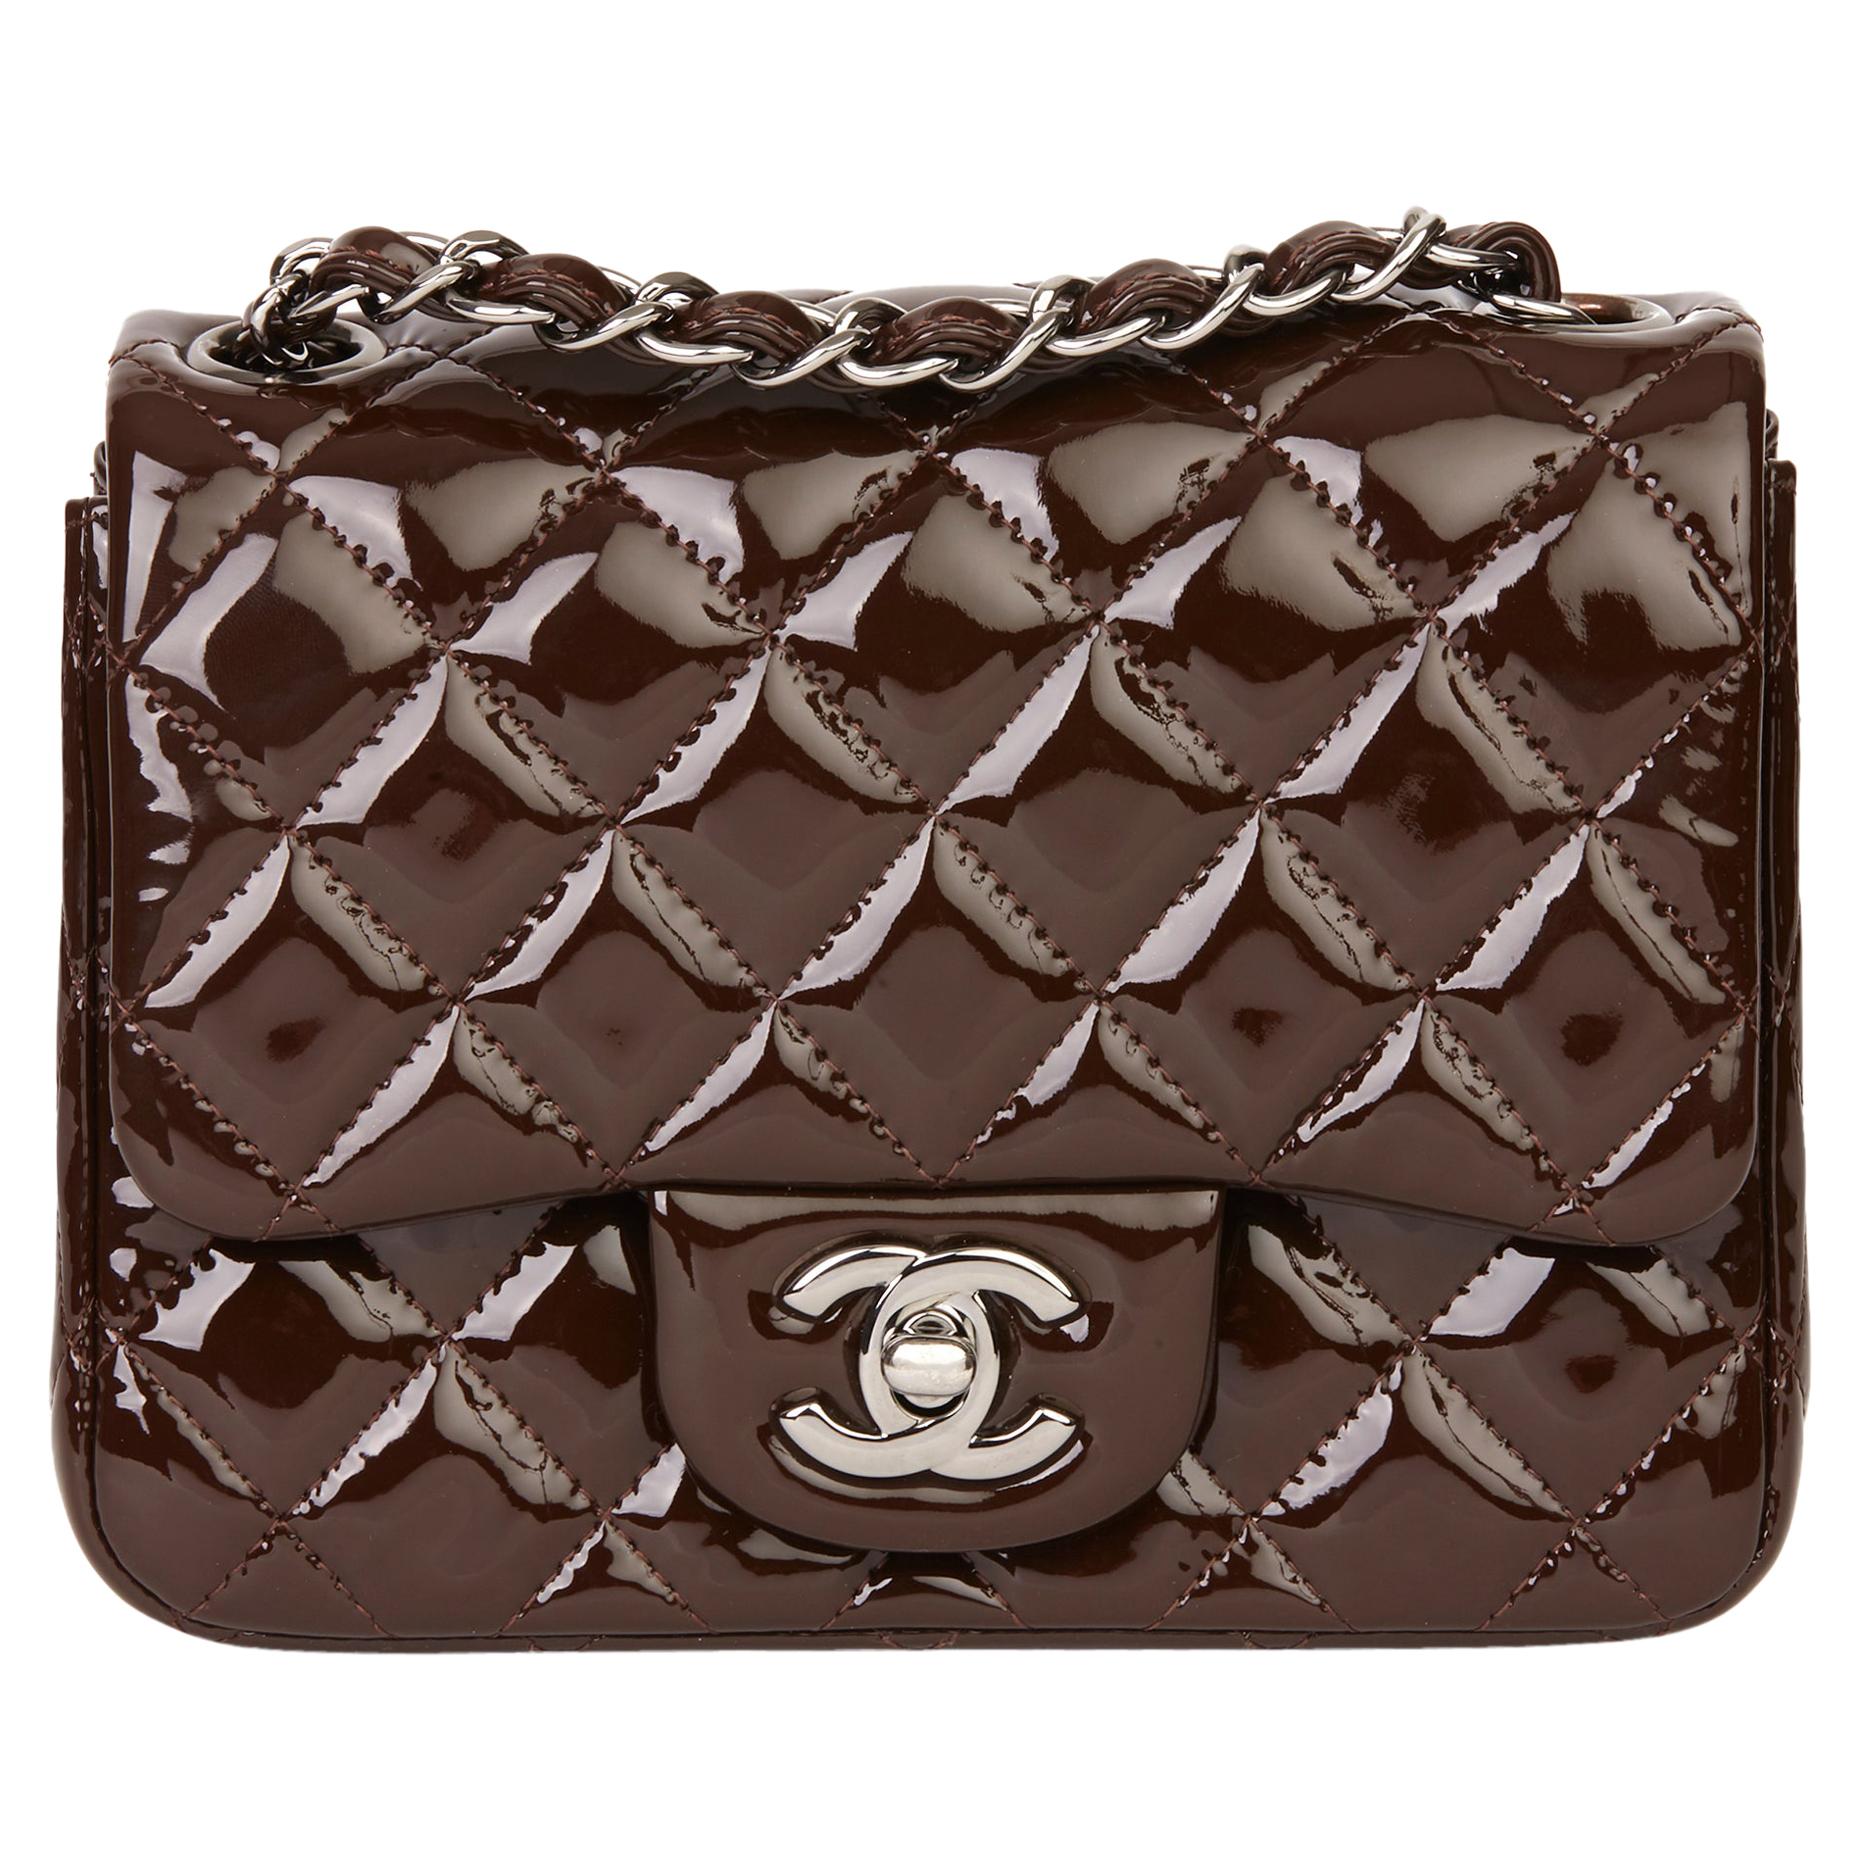 2014 Chanel Chocolate Brown Quilted Patent Leather Mini Flap Bag